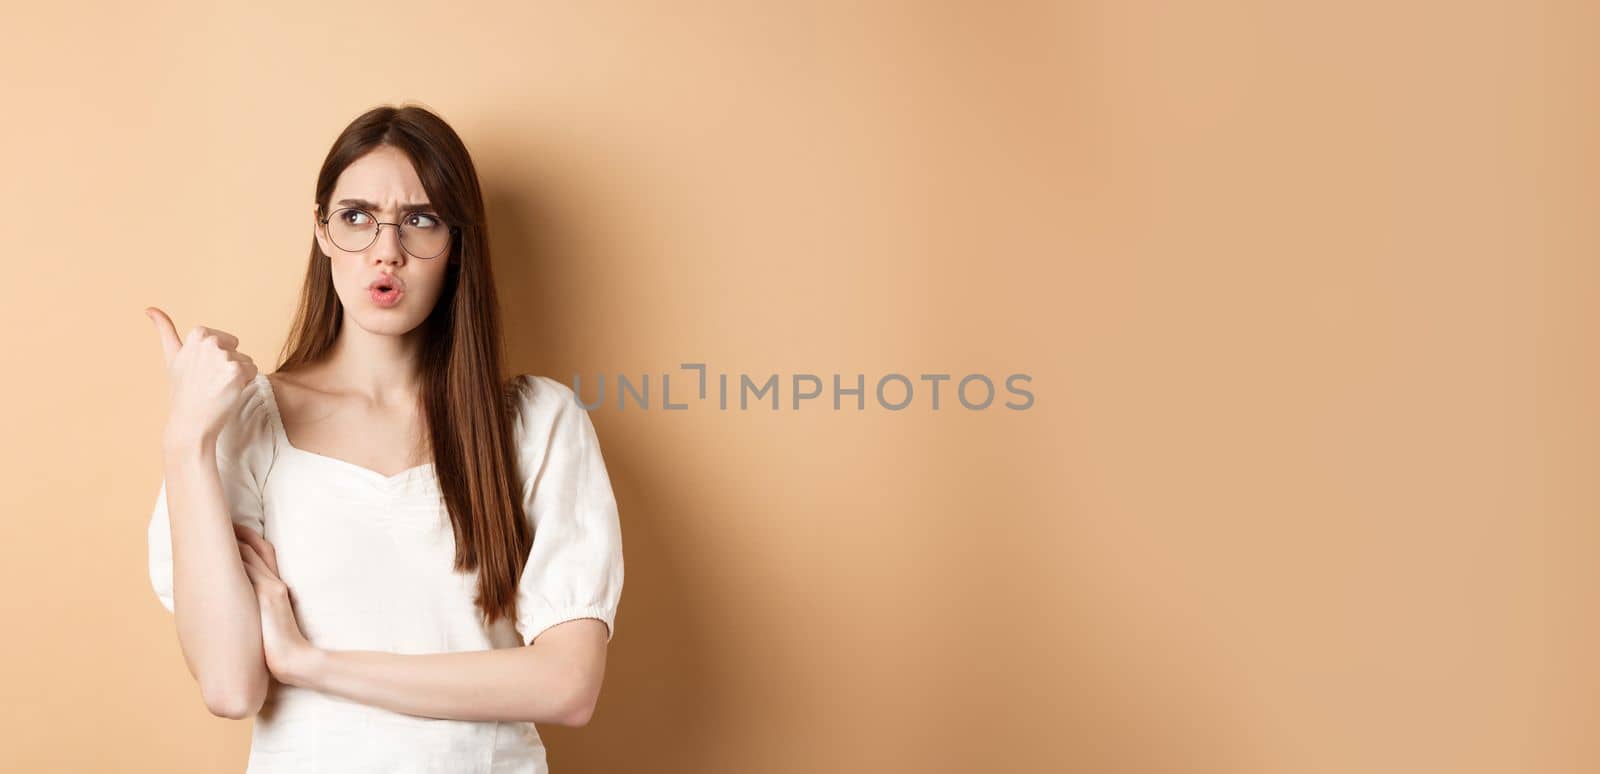 Confused and suspicious young woman in glasses frowning, pointing and looking aside with displeased face expression, standing on beige background.